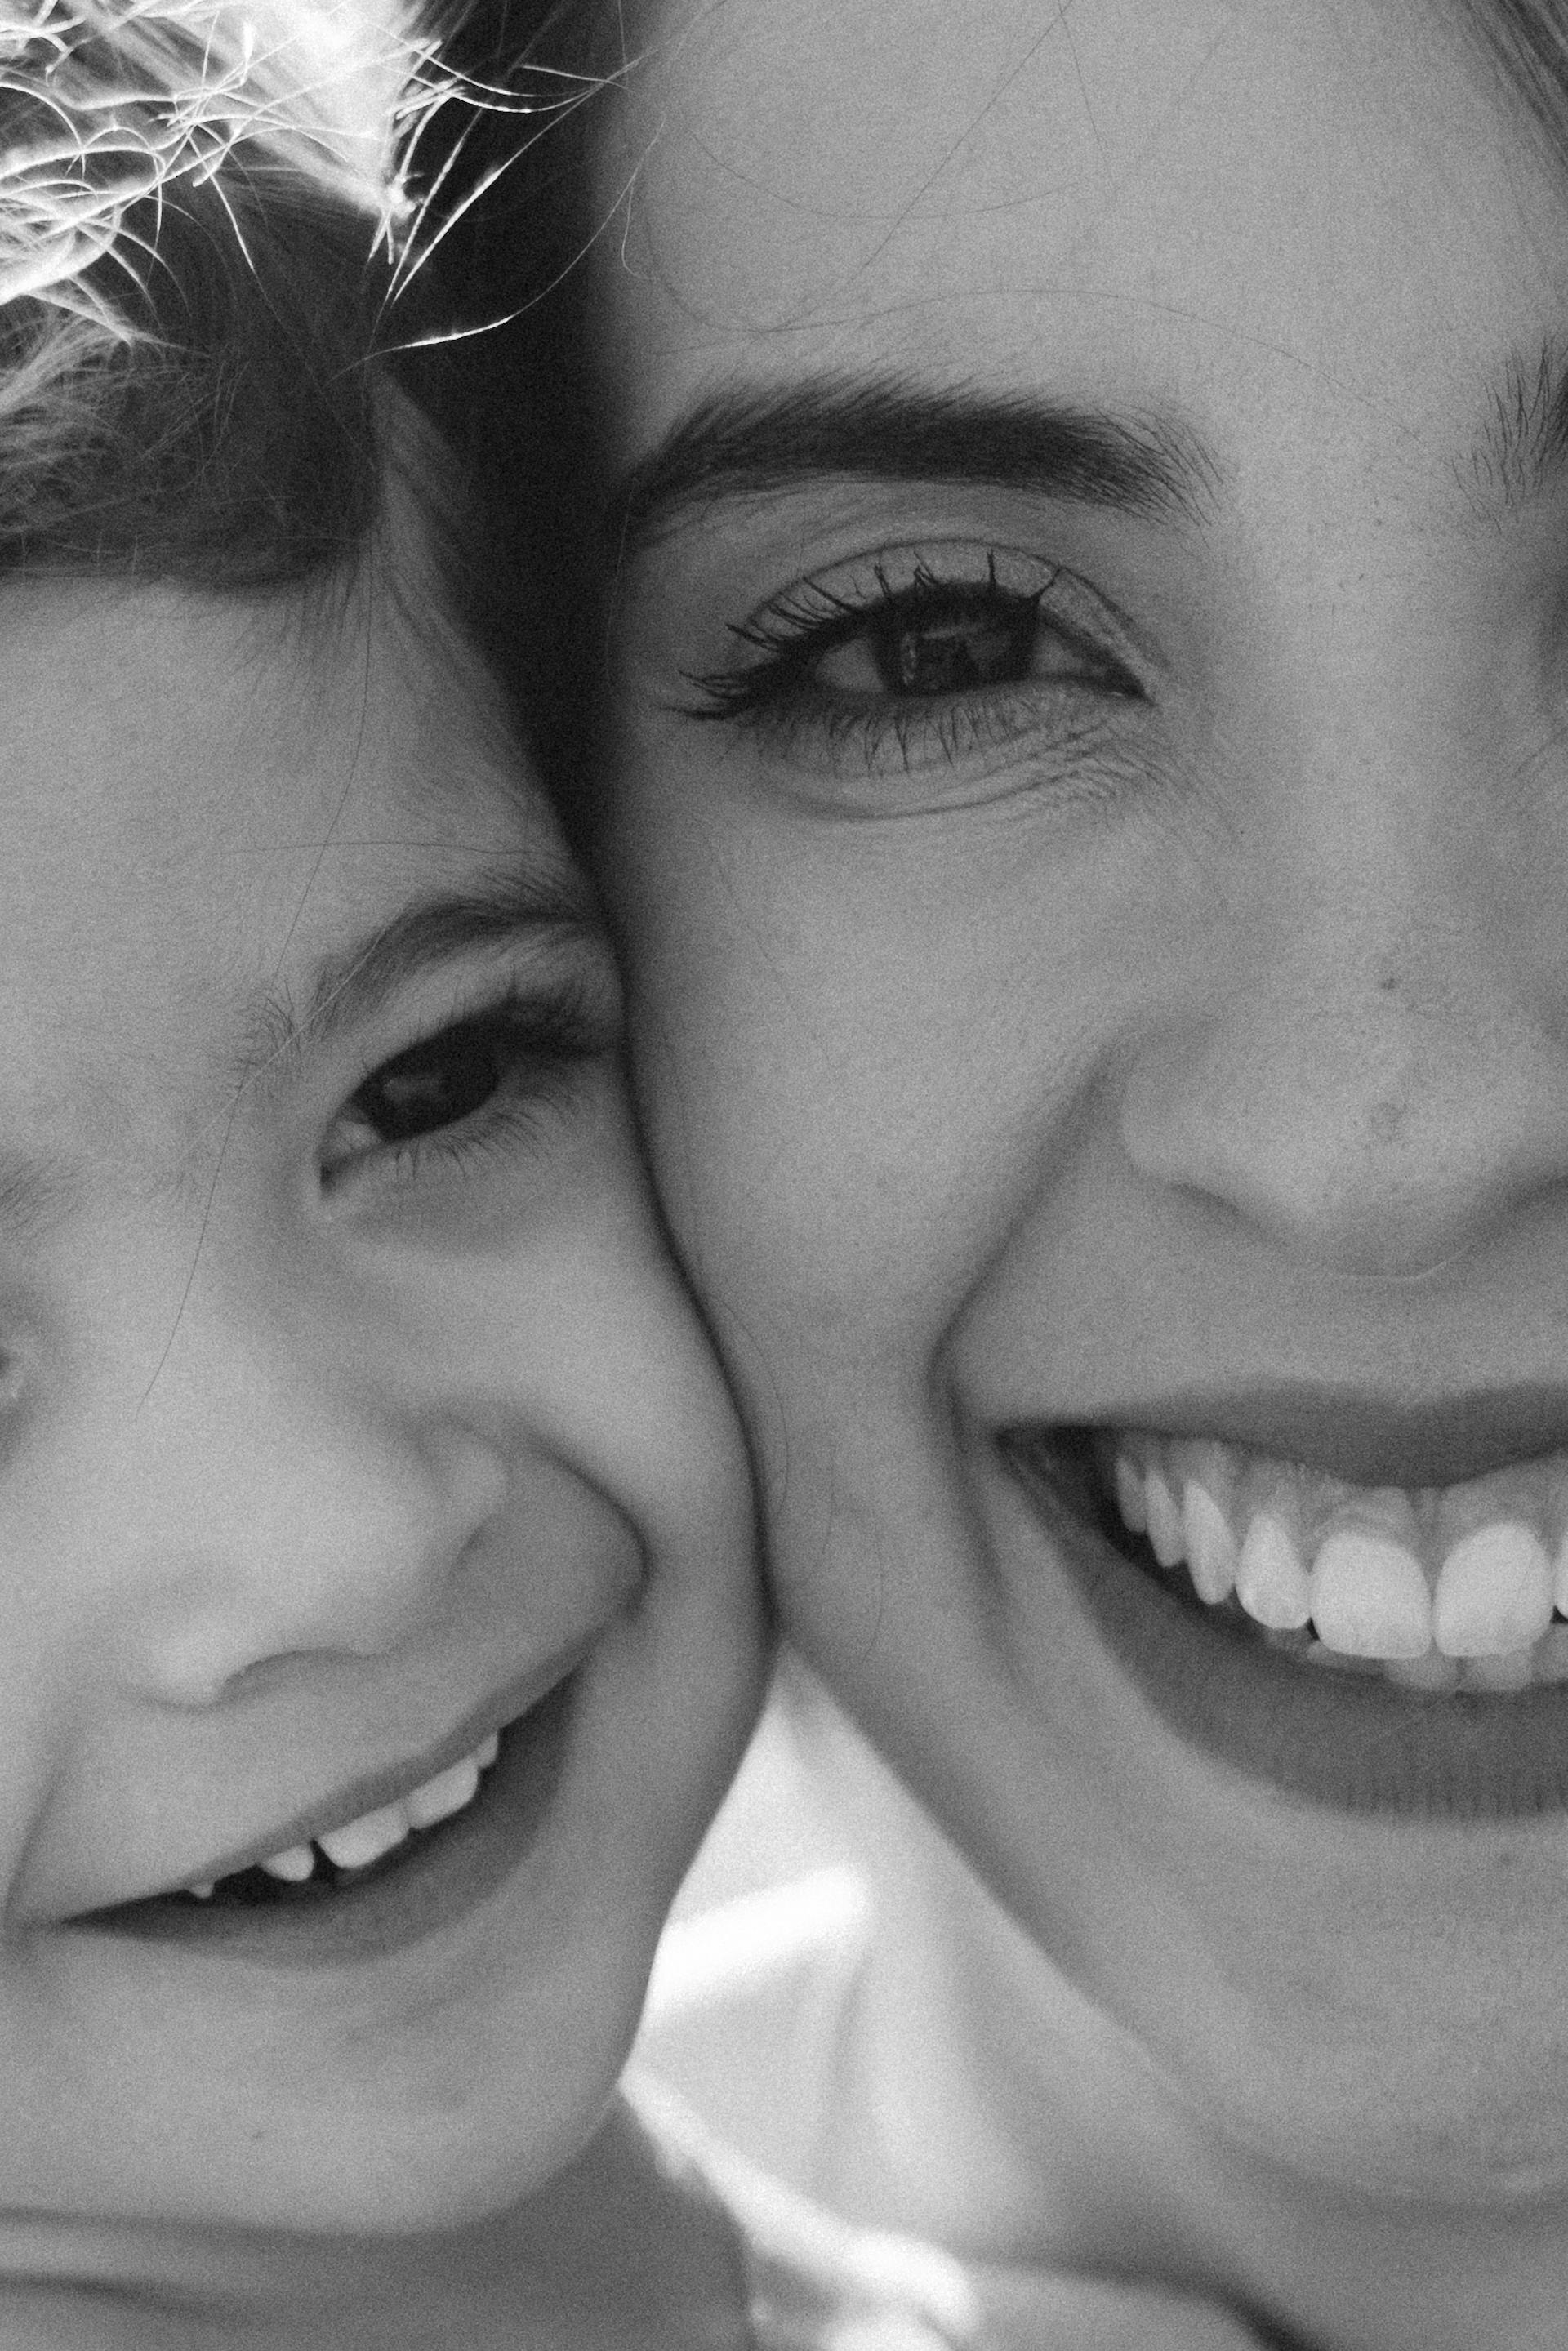 A close up of a mother and son | Source: Pexels